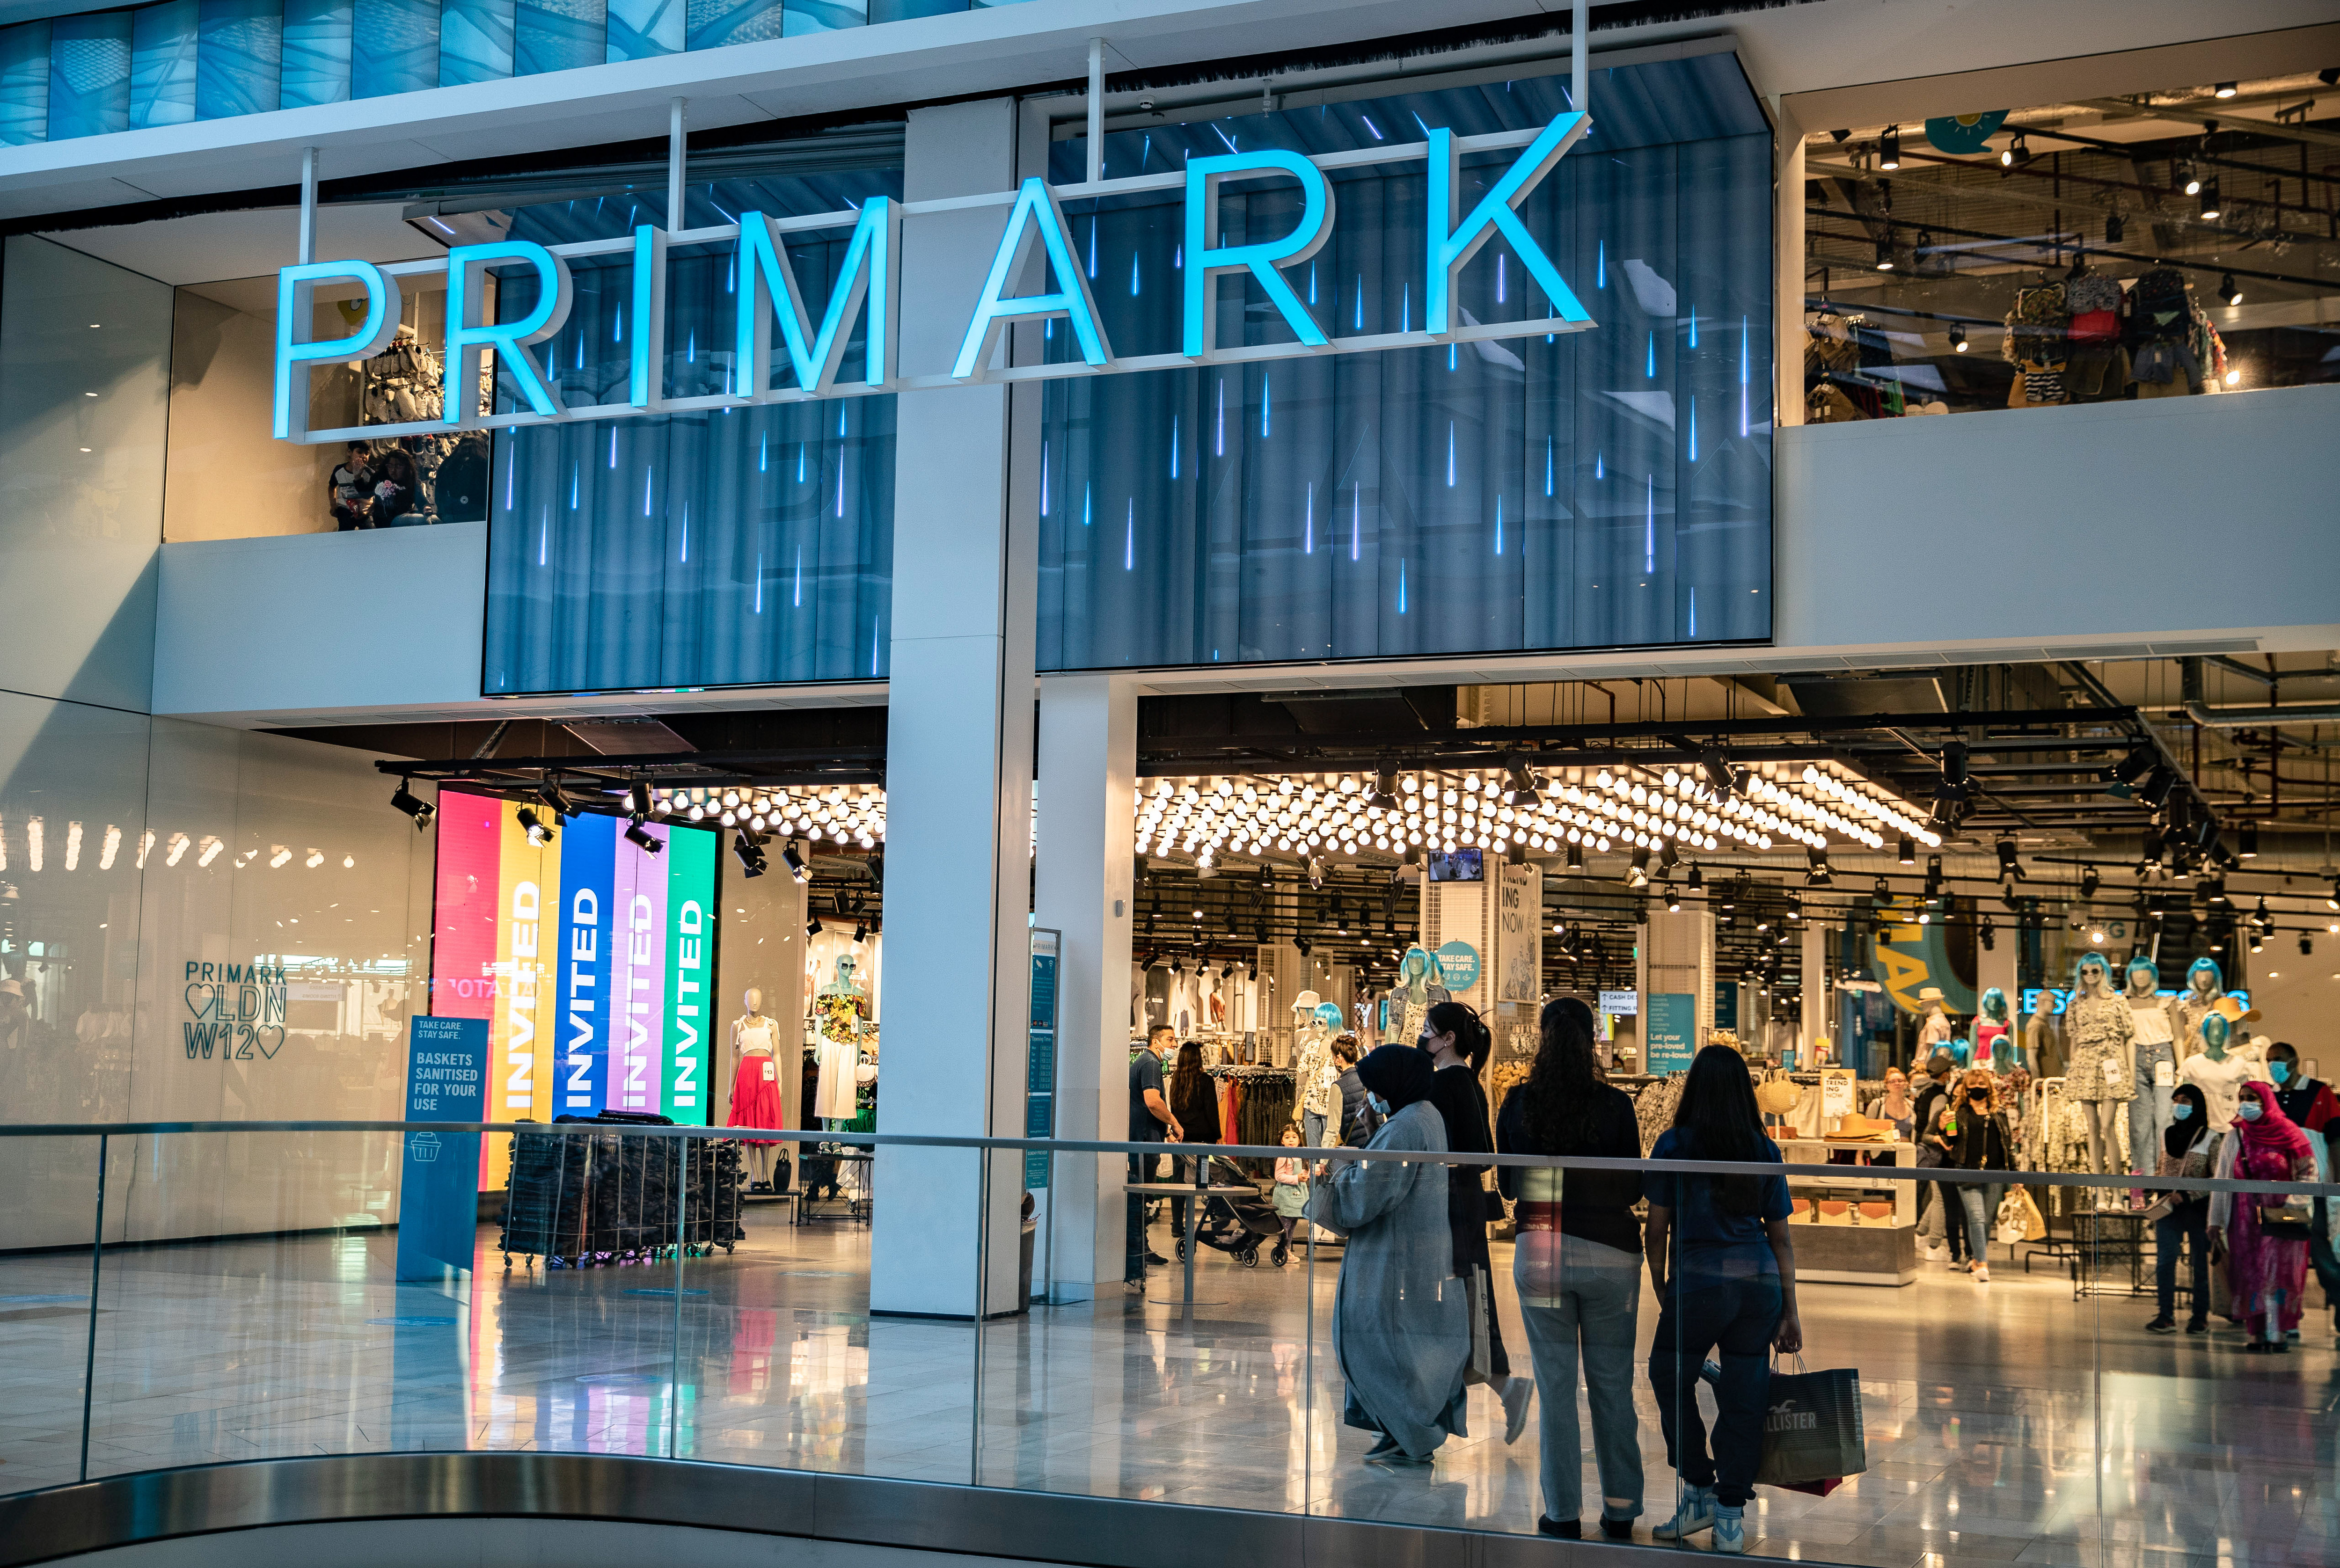 Primark launches click and collect at 32 stores in London and its